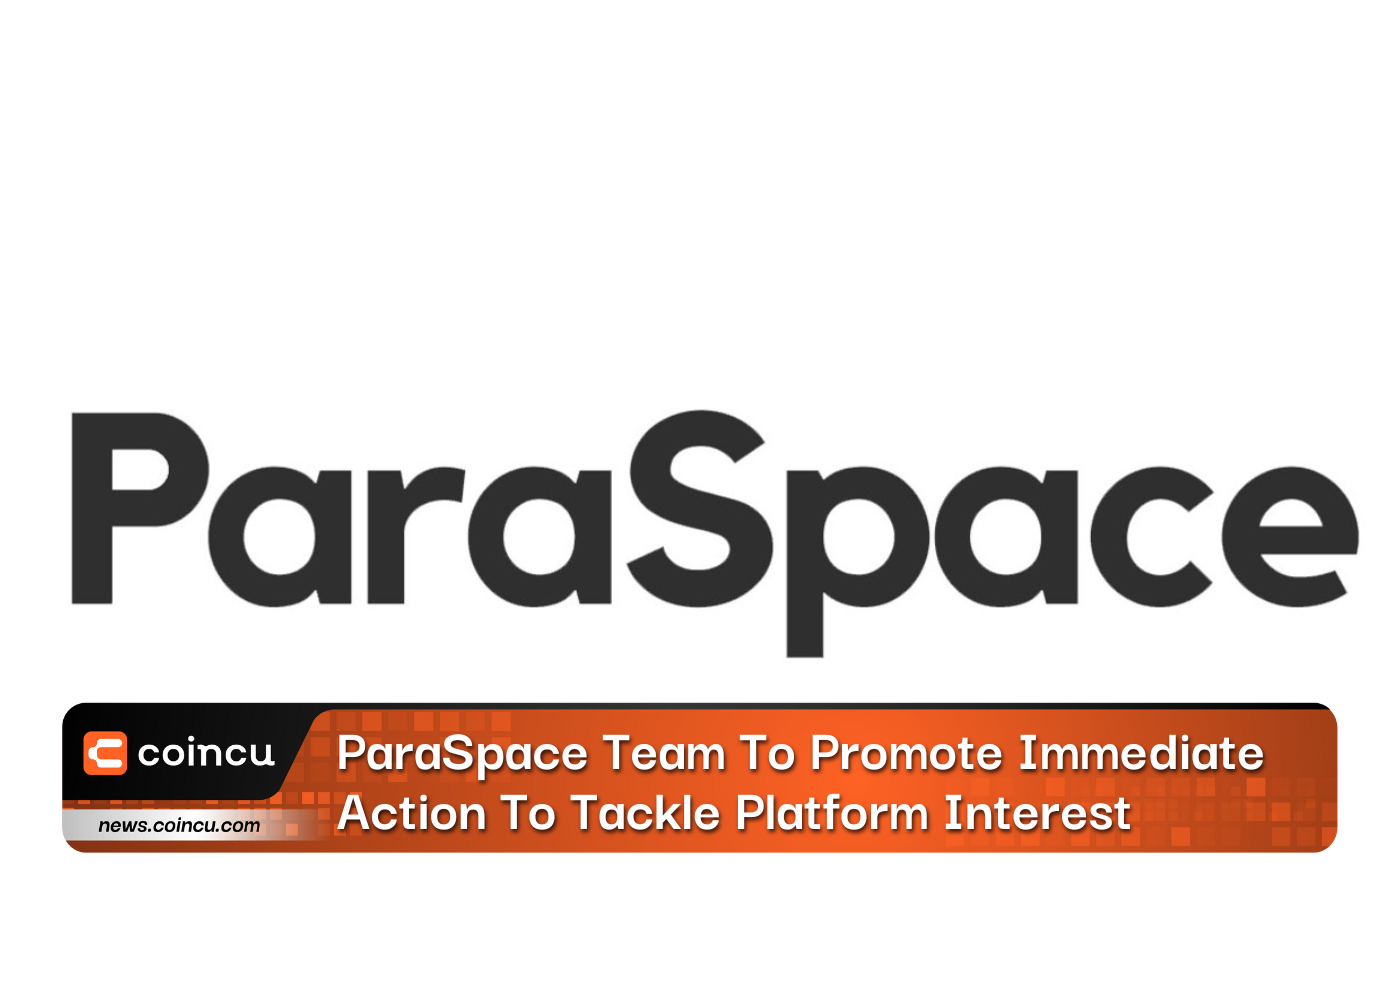 ParaSpace Team To Promote Immediate Action To Tackle Platform Interest